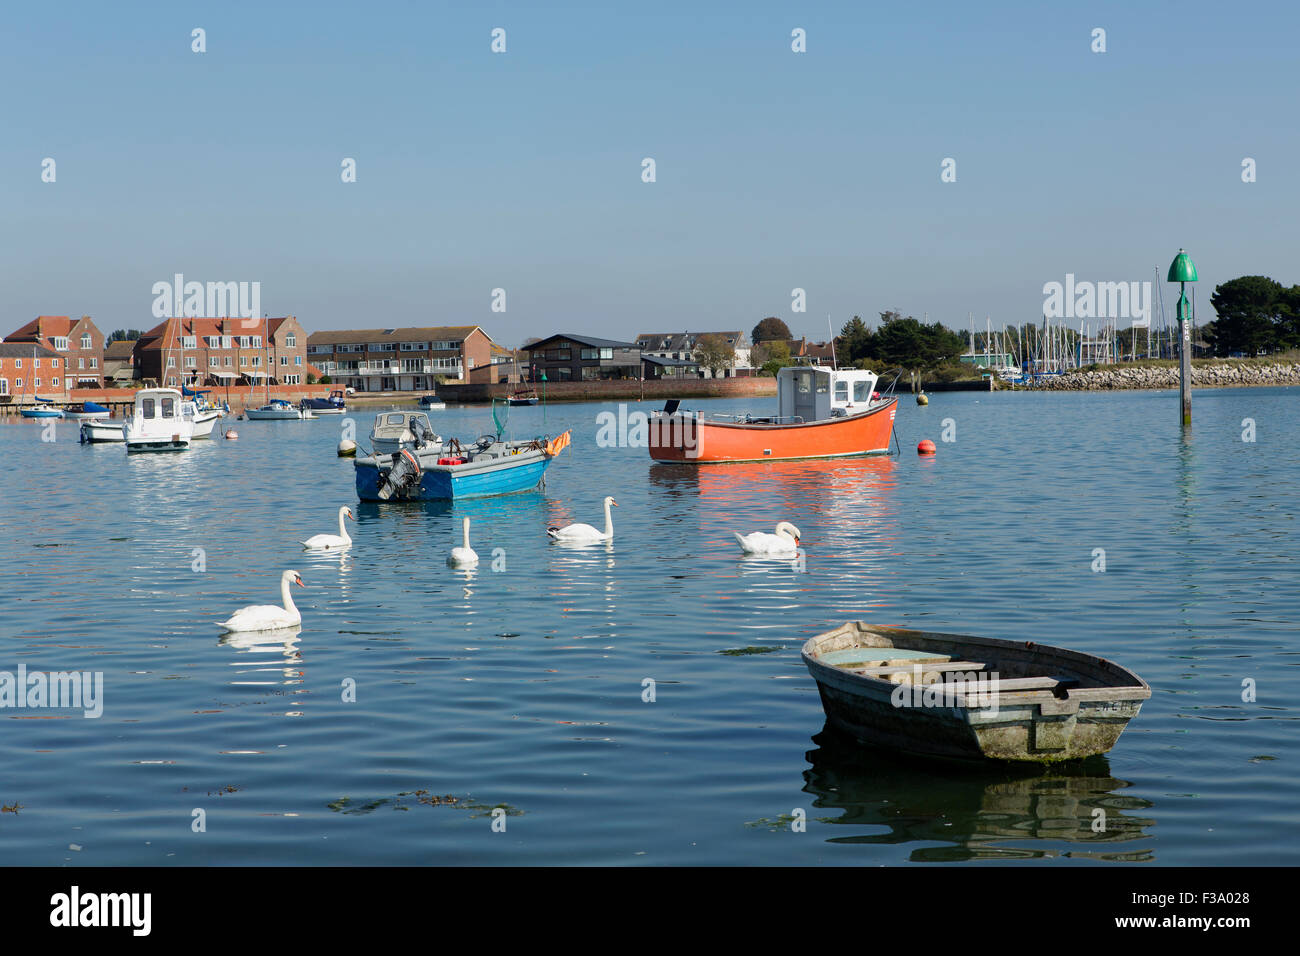 Collection of small boats or tenders in Chichester harbour at Emsworth. Swans can be seen amongst the mixed boats Stock Photo